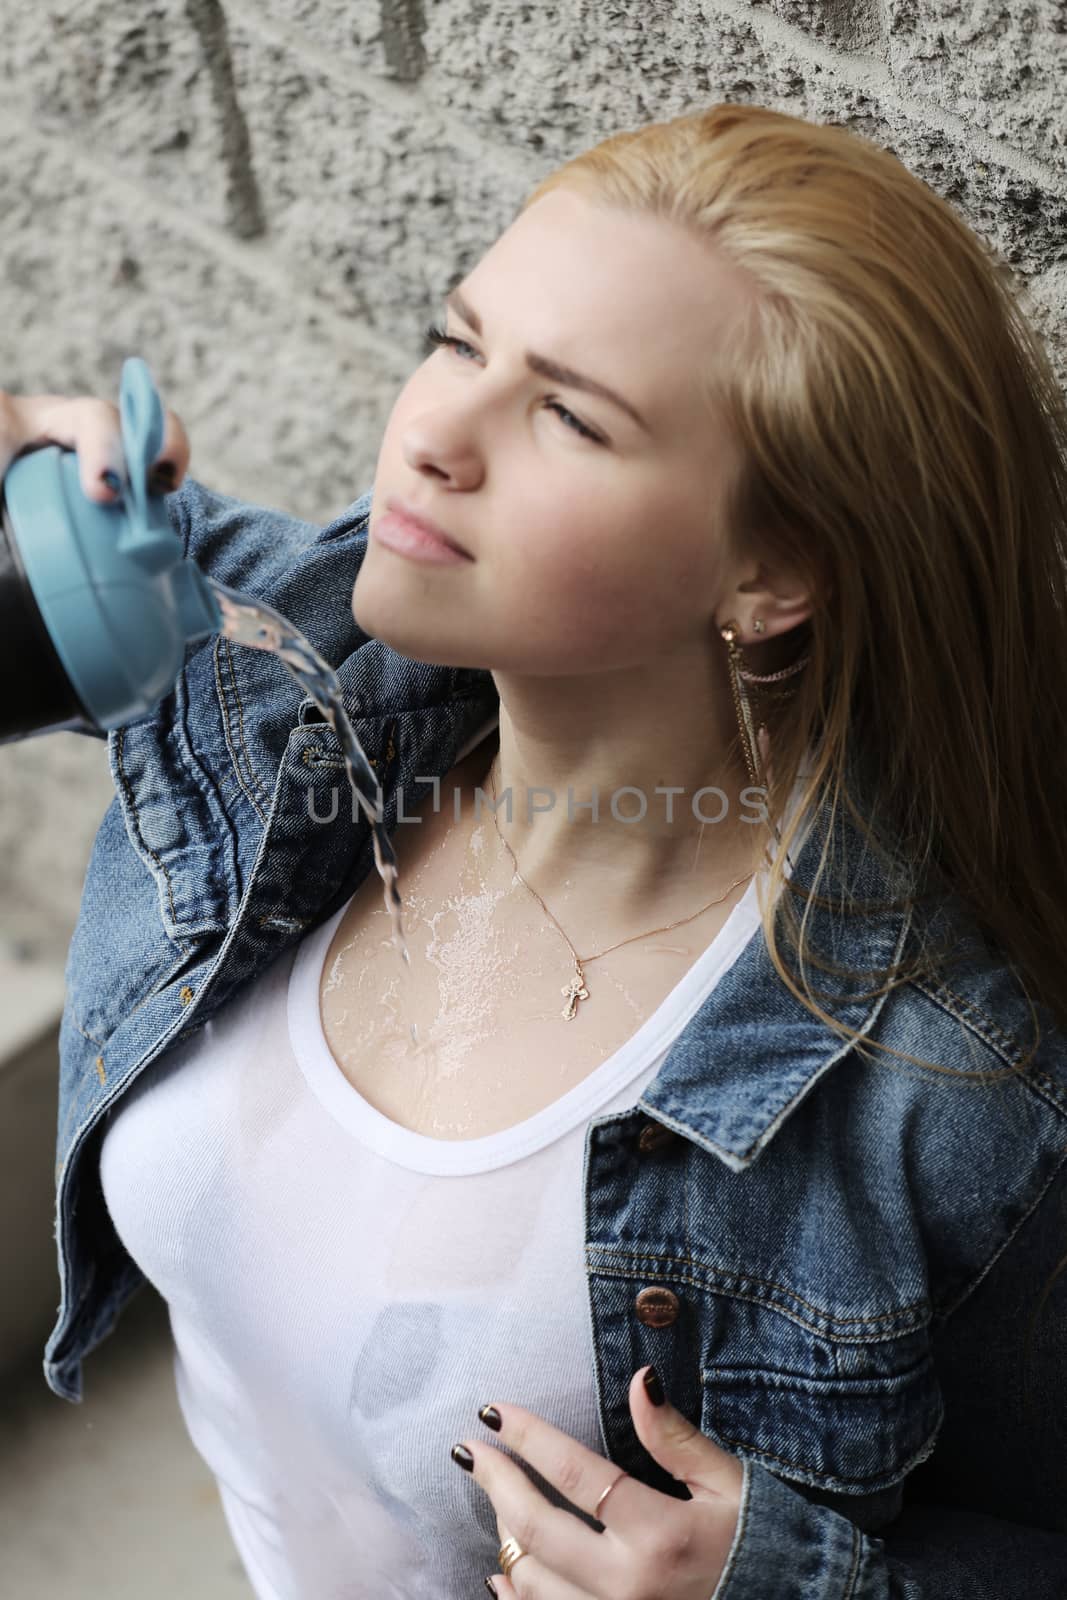 Woman spilling water on herself, urban style sexy portrait